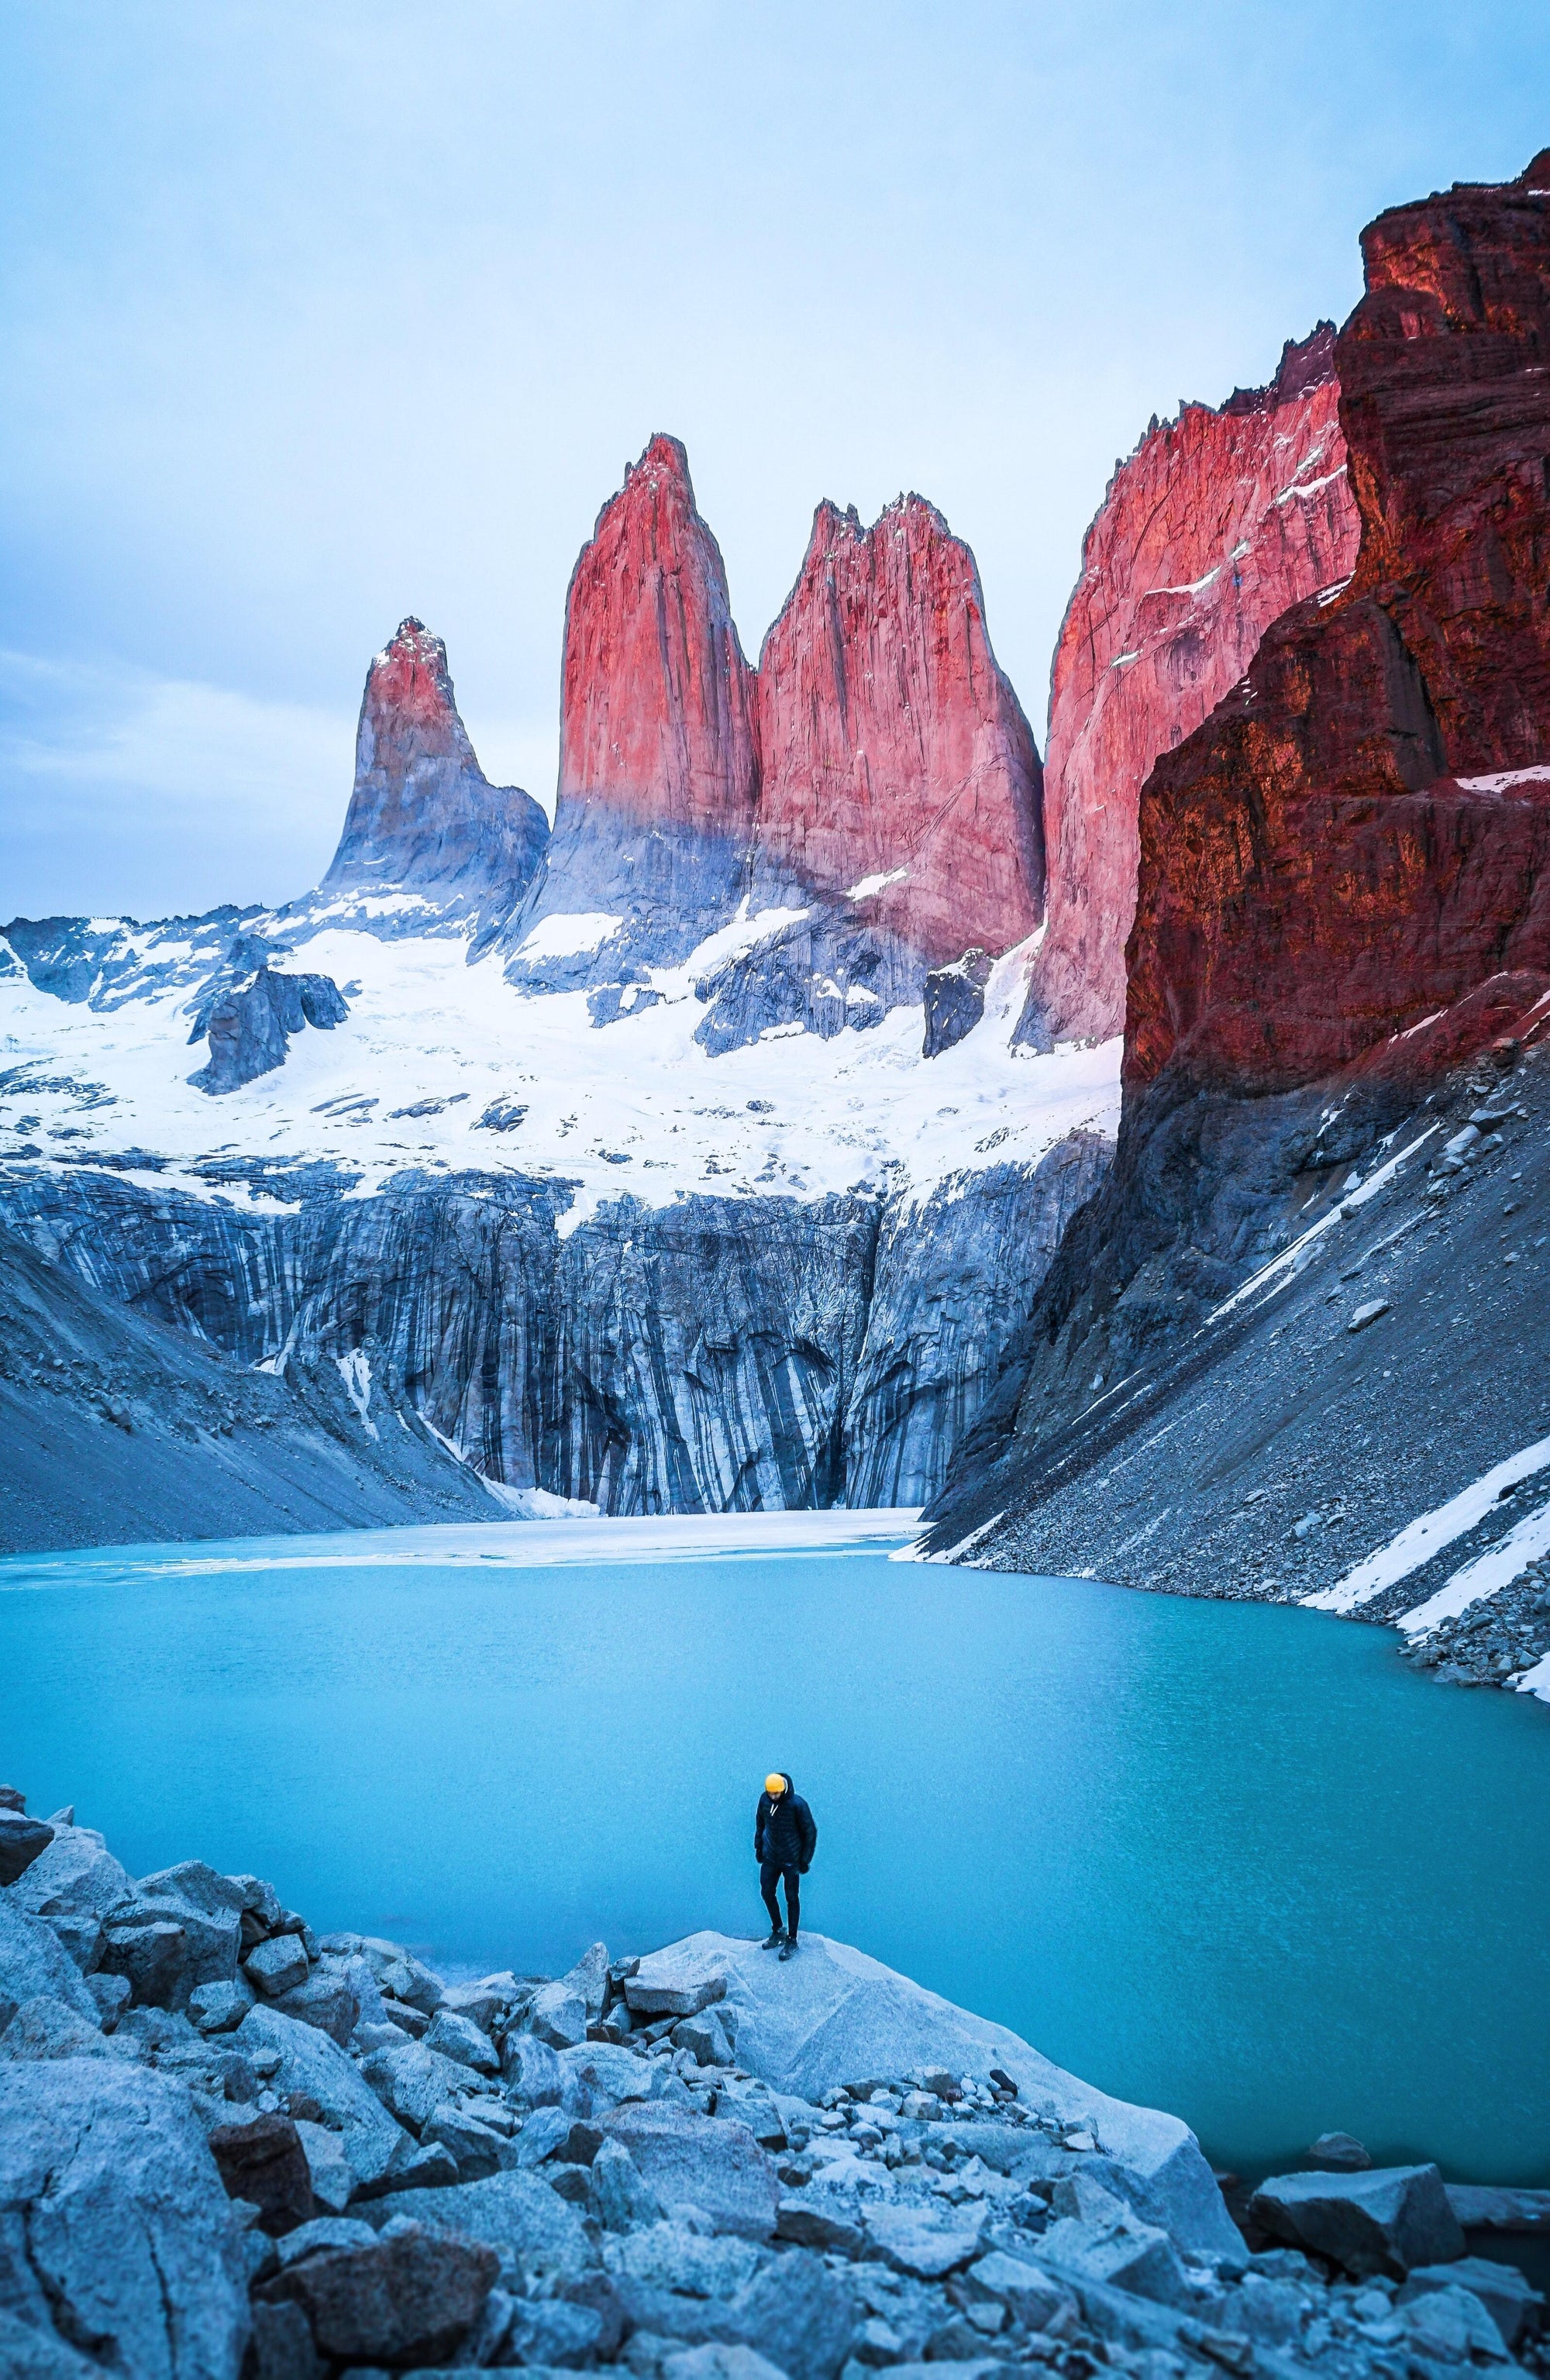 Our Patagonia Bucket List